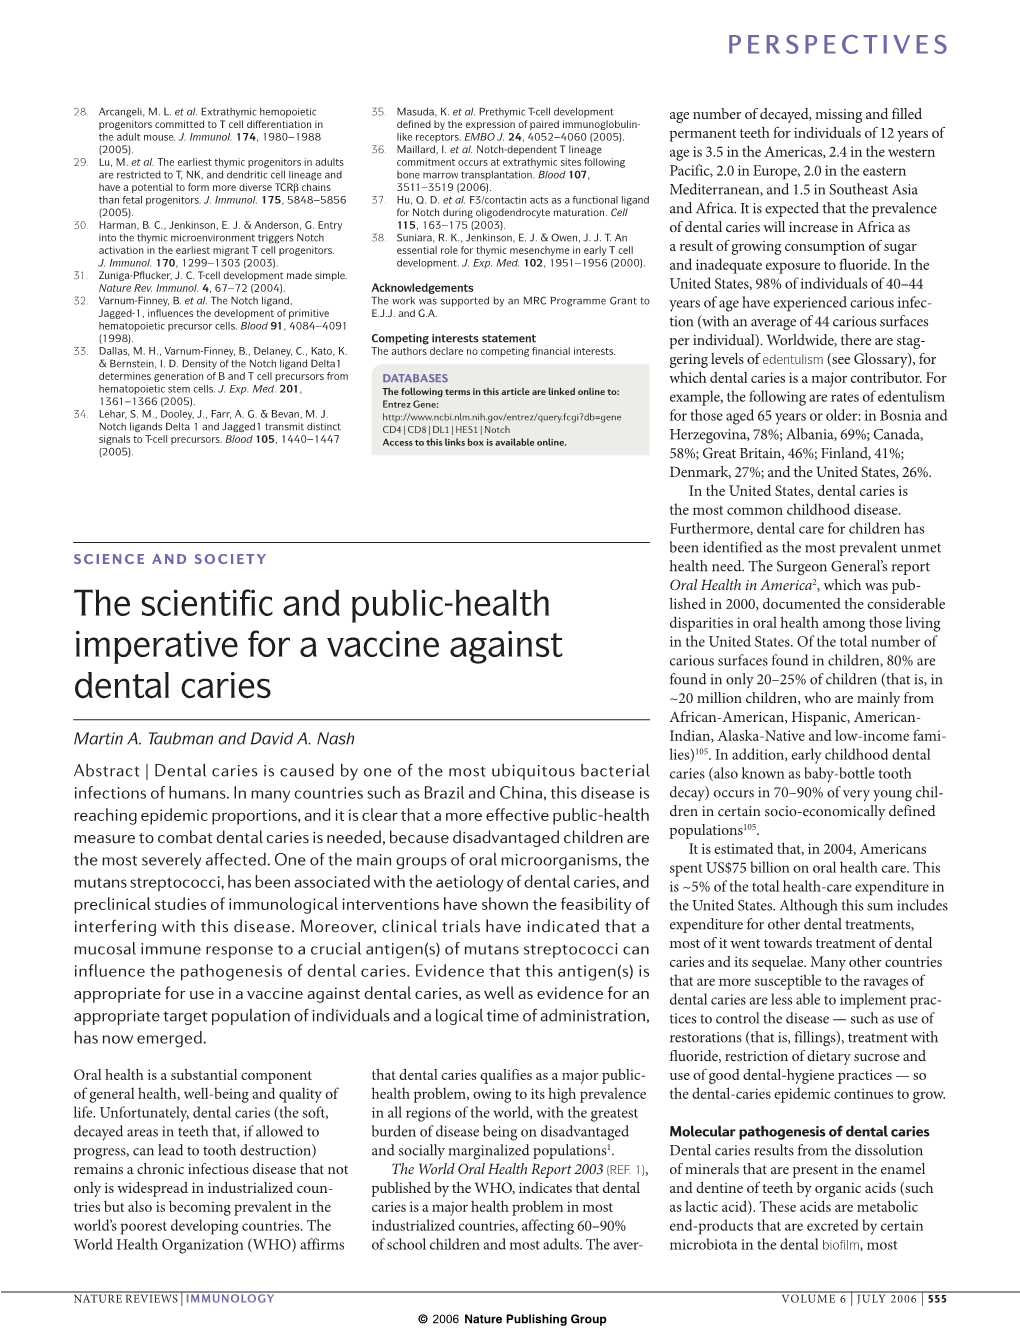 The Scientific and Public-Health Imperative for a Vaccine Against